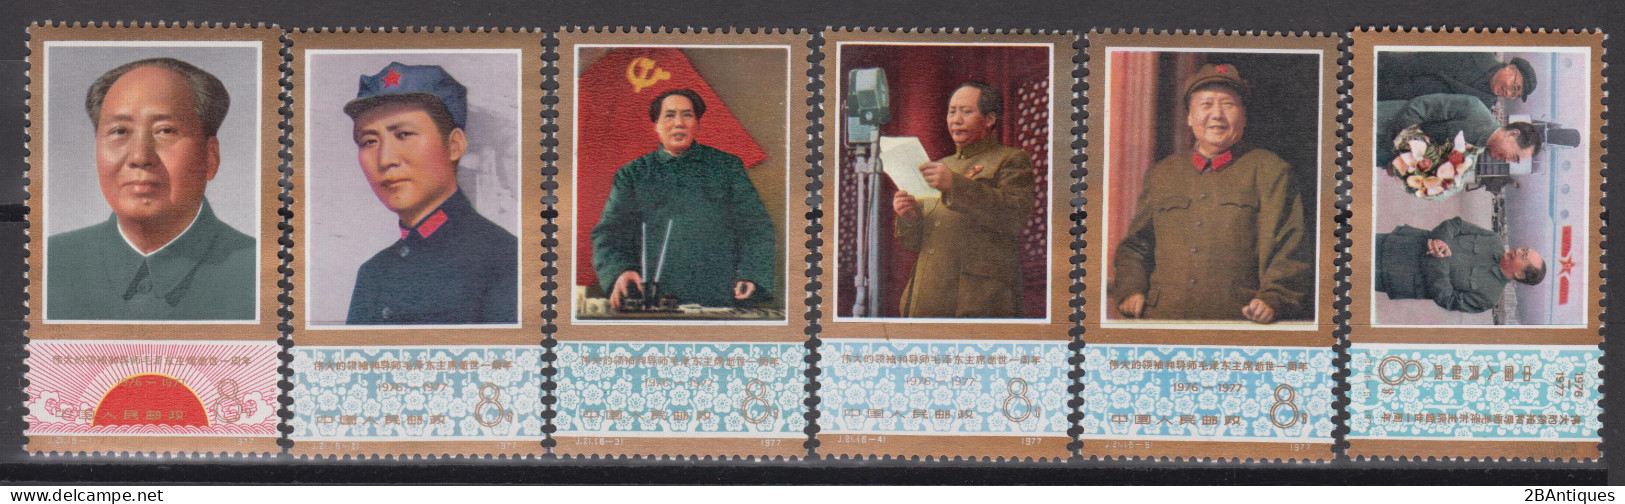 PR CHINA 1977 - The 1st Anniversary Of The Death Of Mao Tse-tung  MNH** OG - Unused Stamps